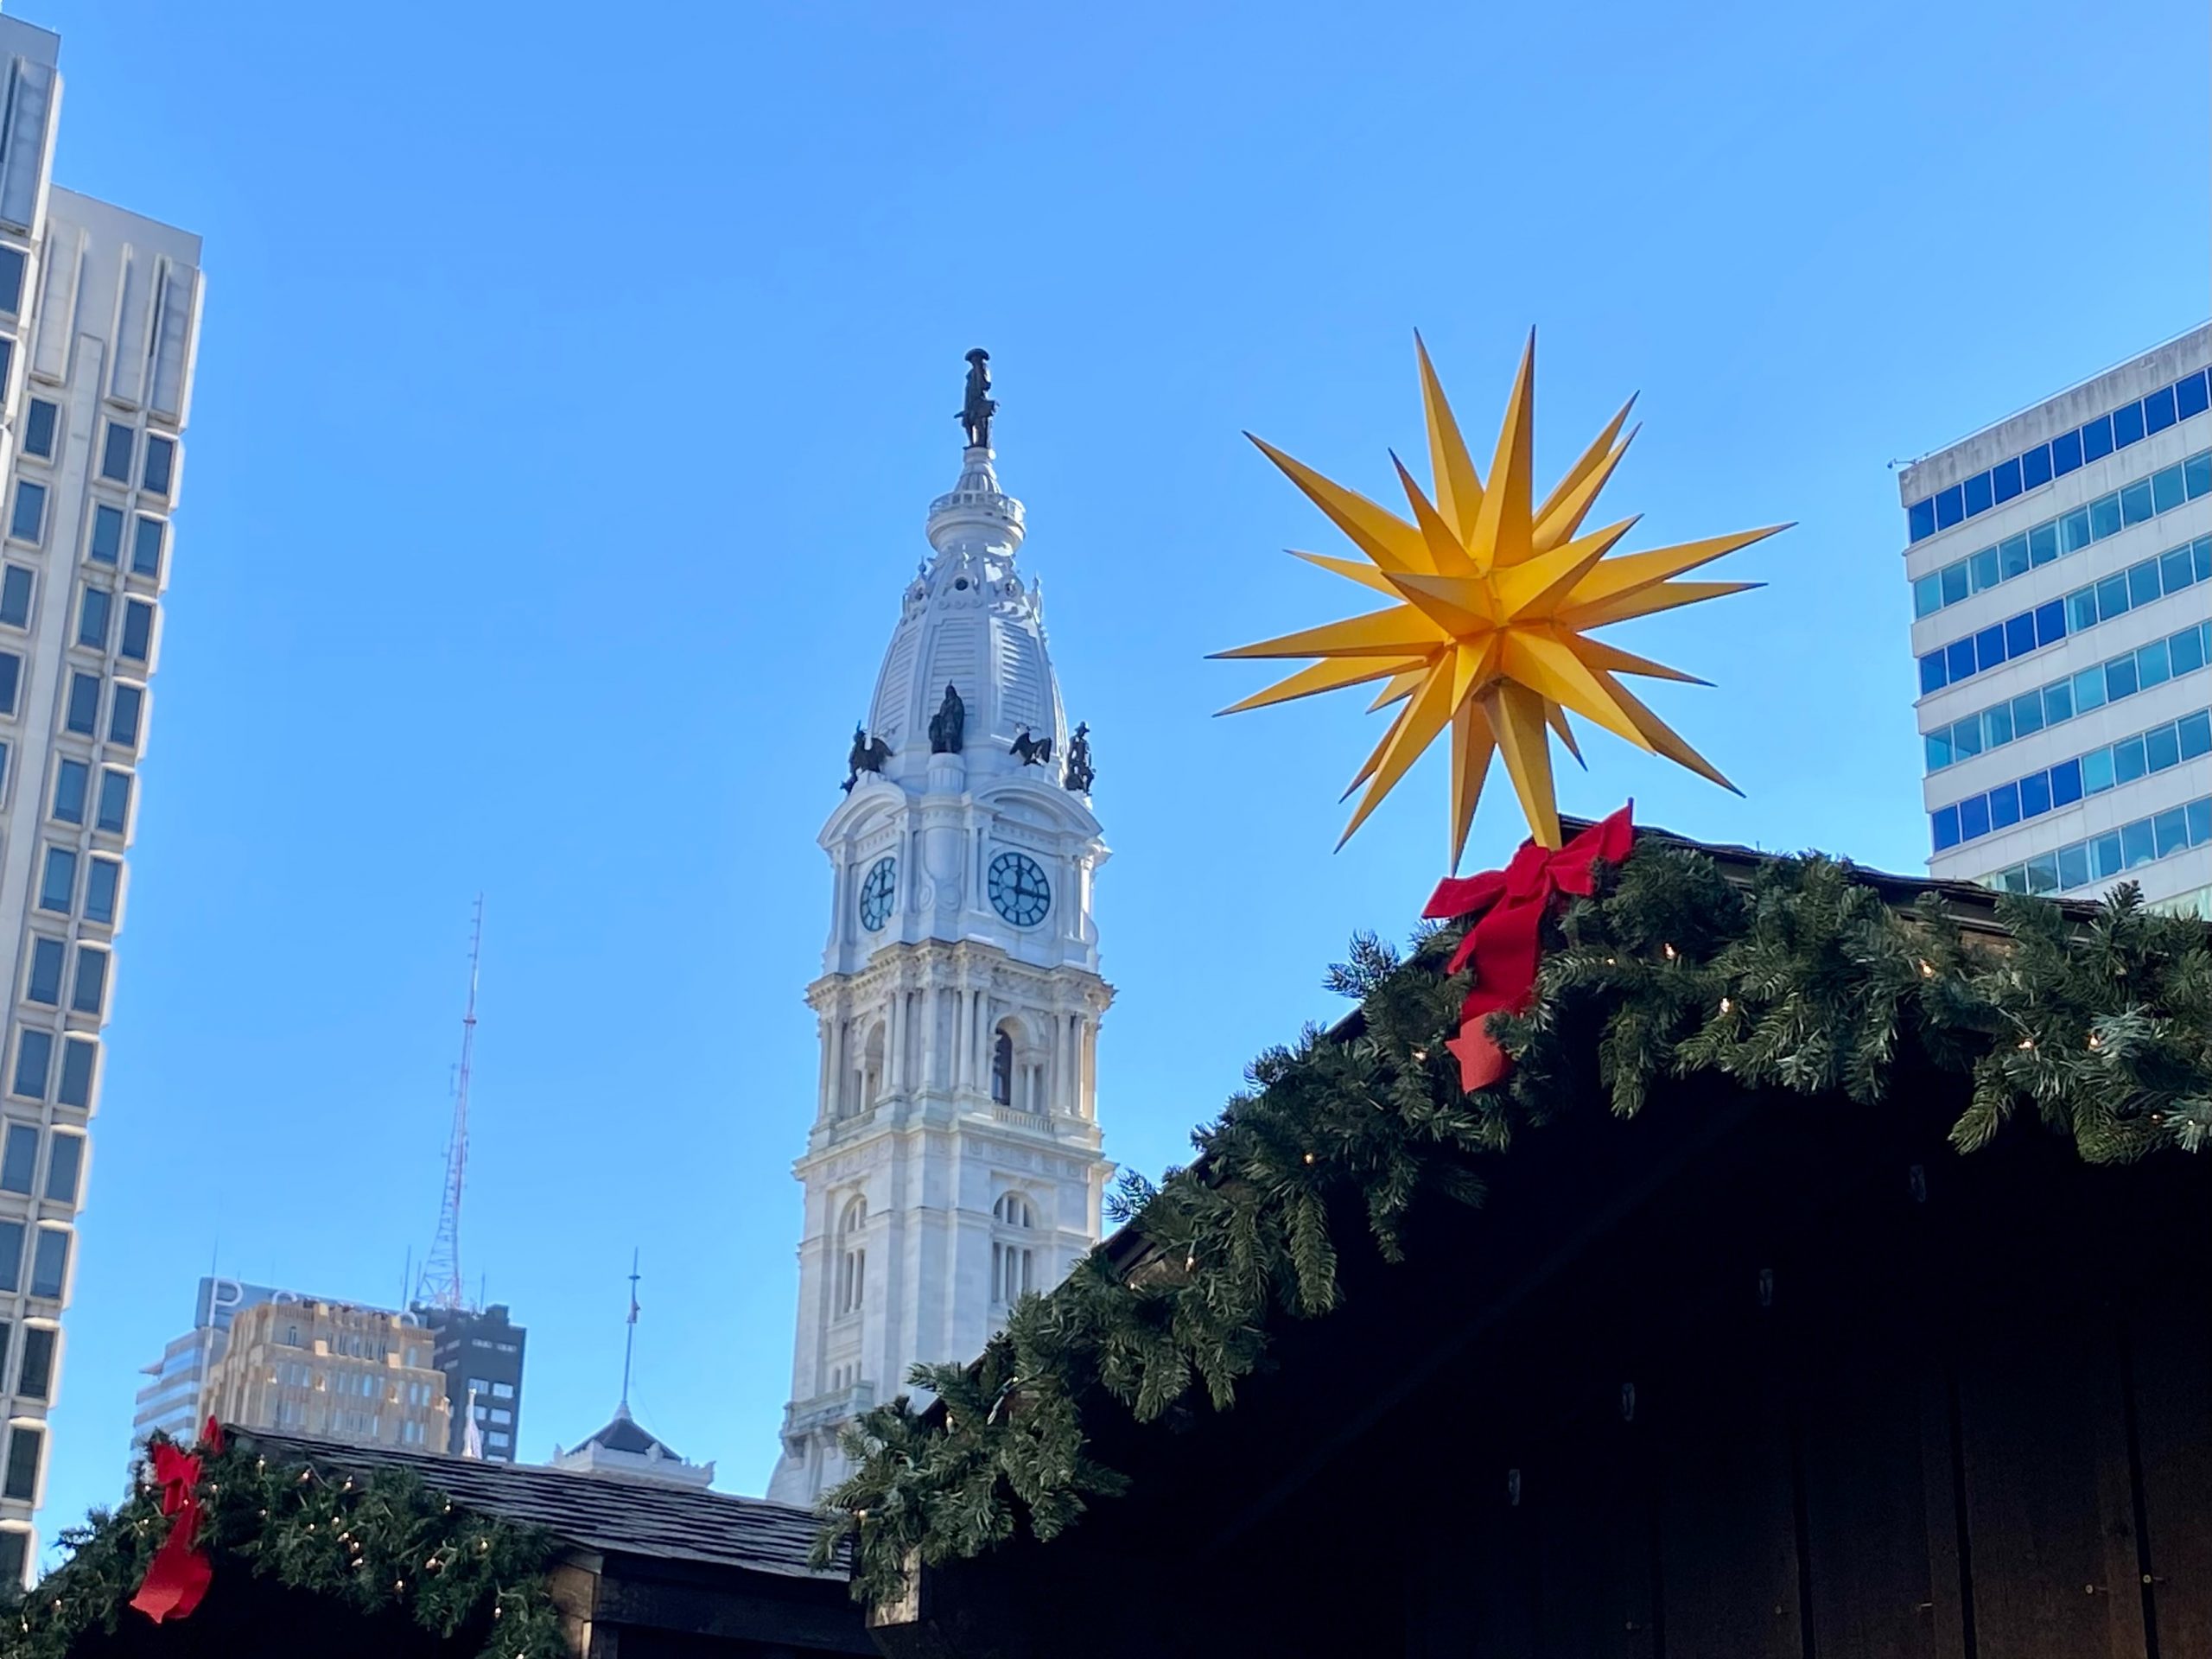 Winter In Dilworth Park, Holiday Markets, and More Ways to Celebrate The 2022 Holiday Season in Philadelphia